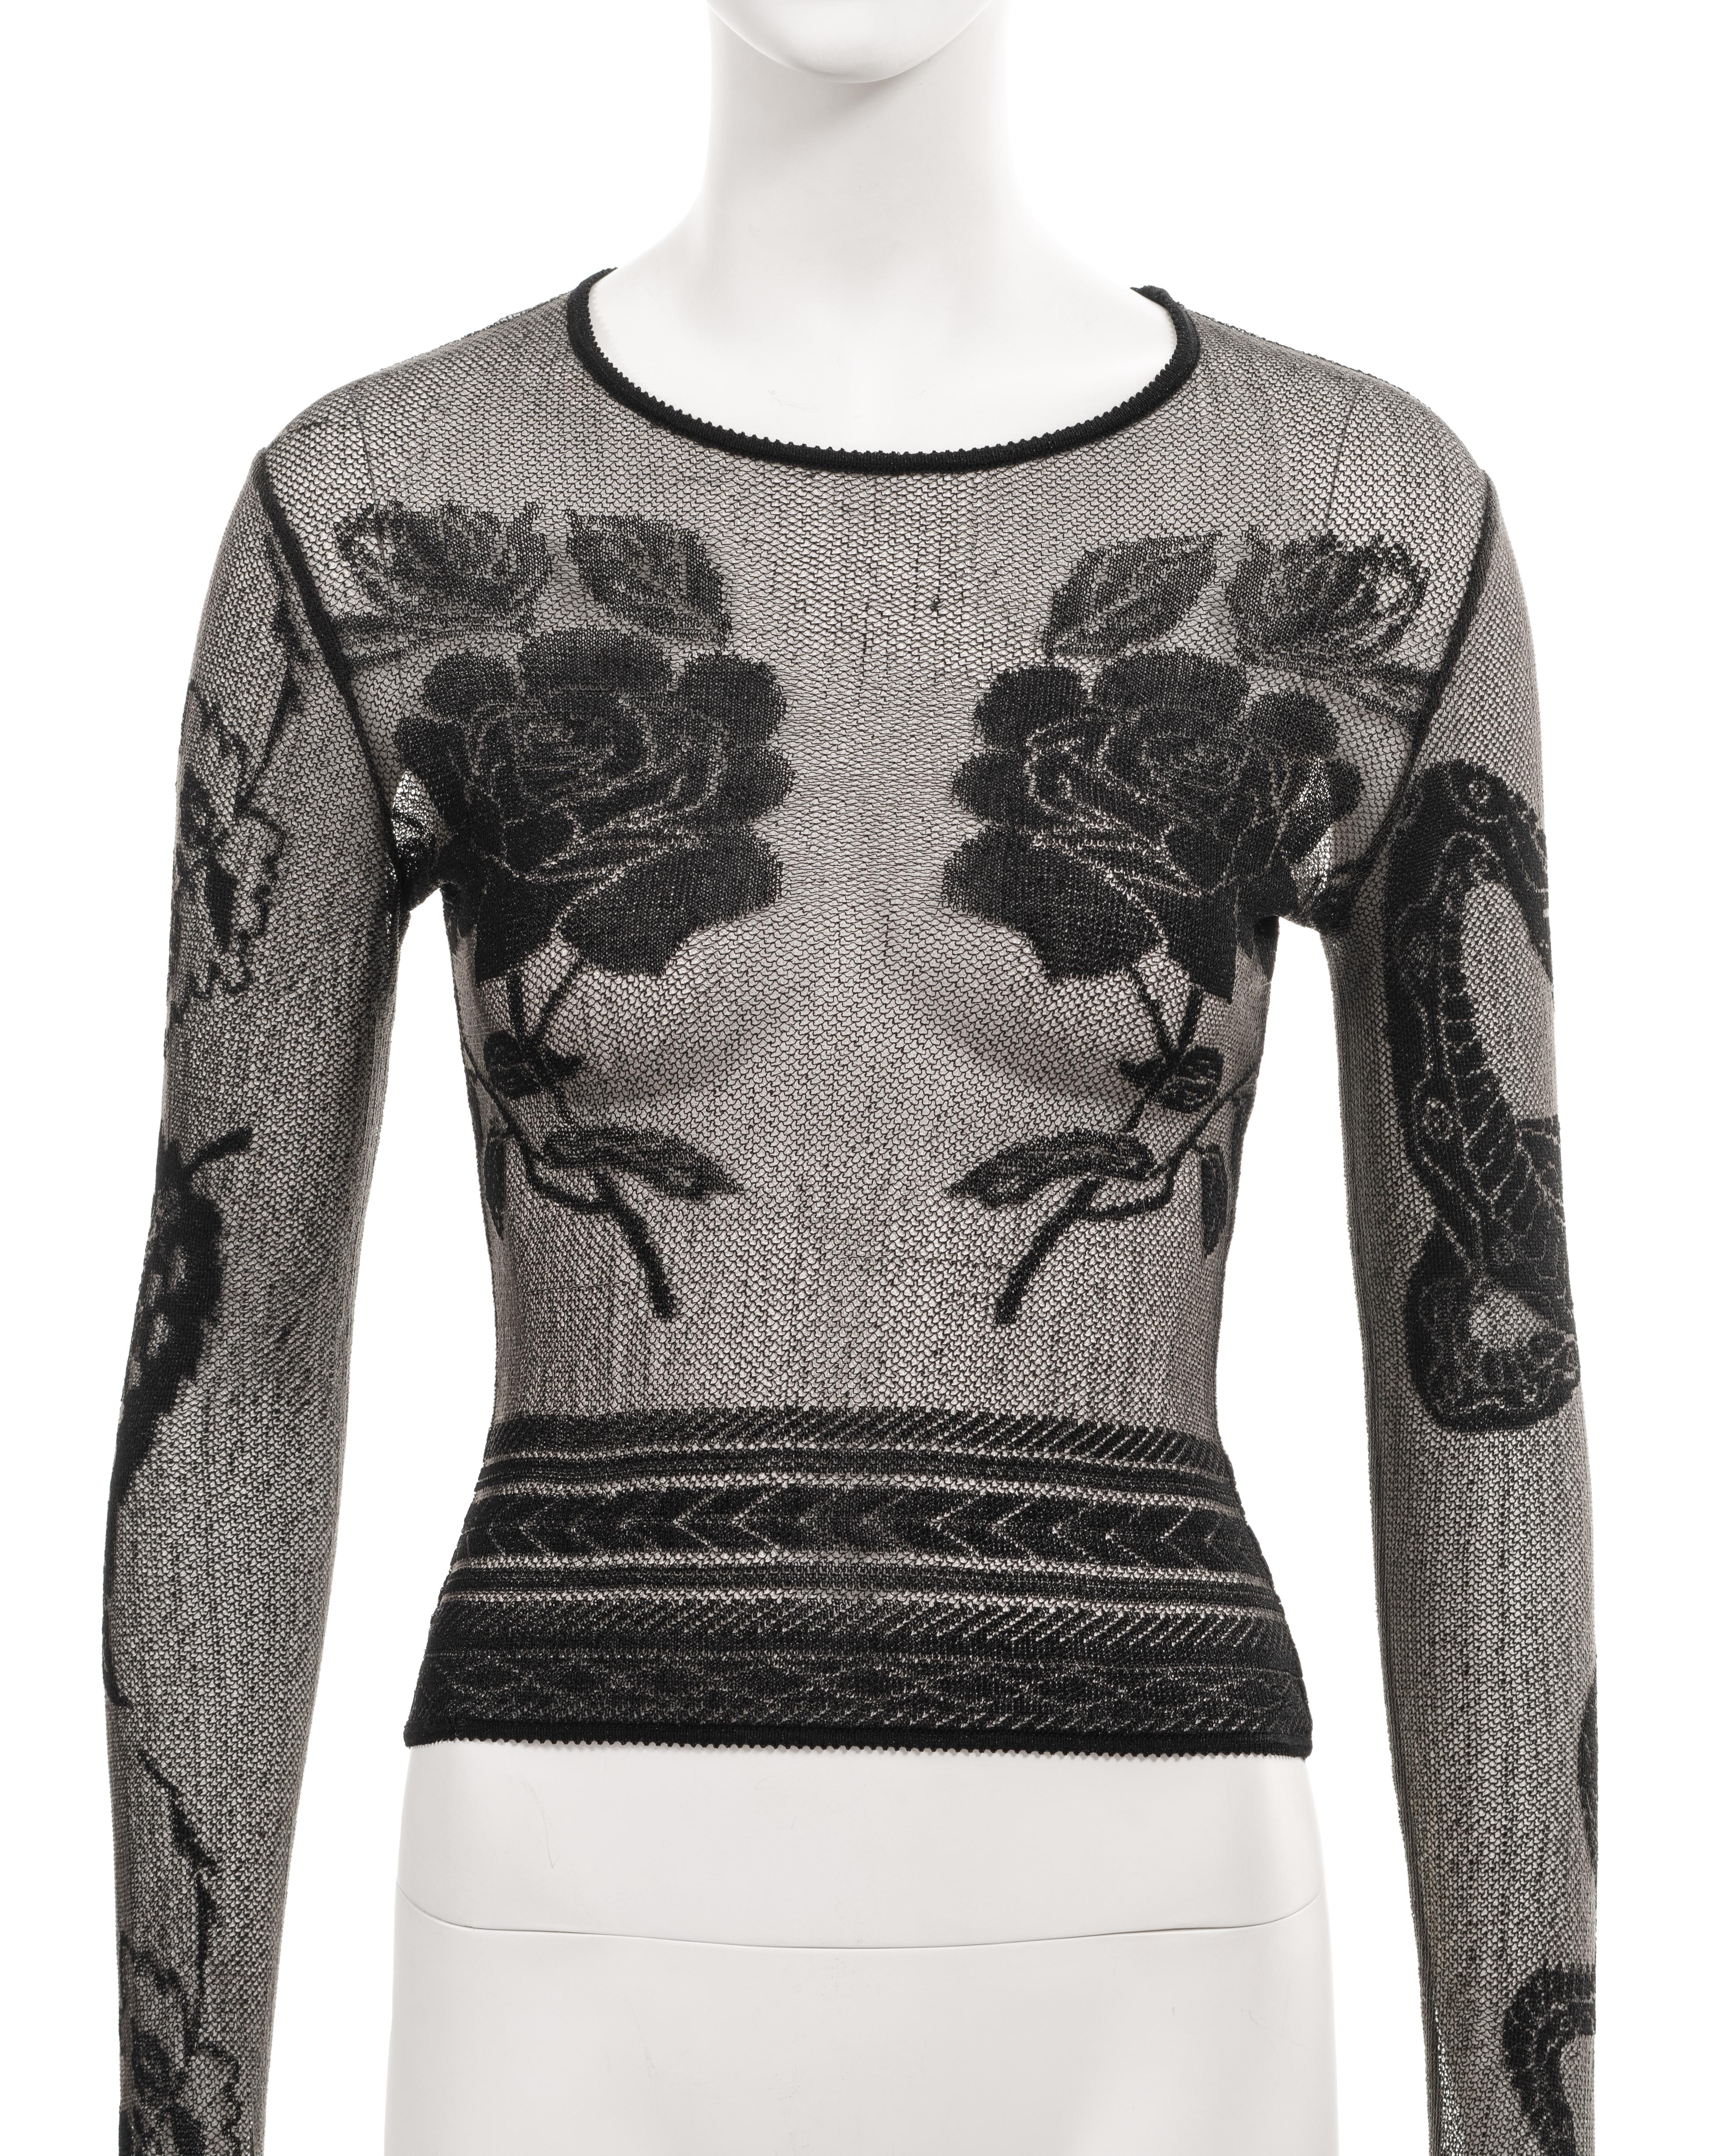 John Galliano black mesh top with tattoo motifs, fw 1997 In Good Condition For Sale In London, GB